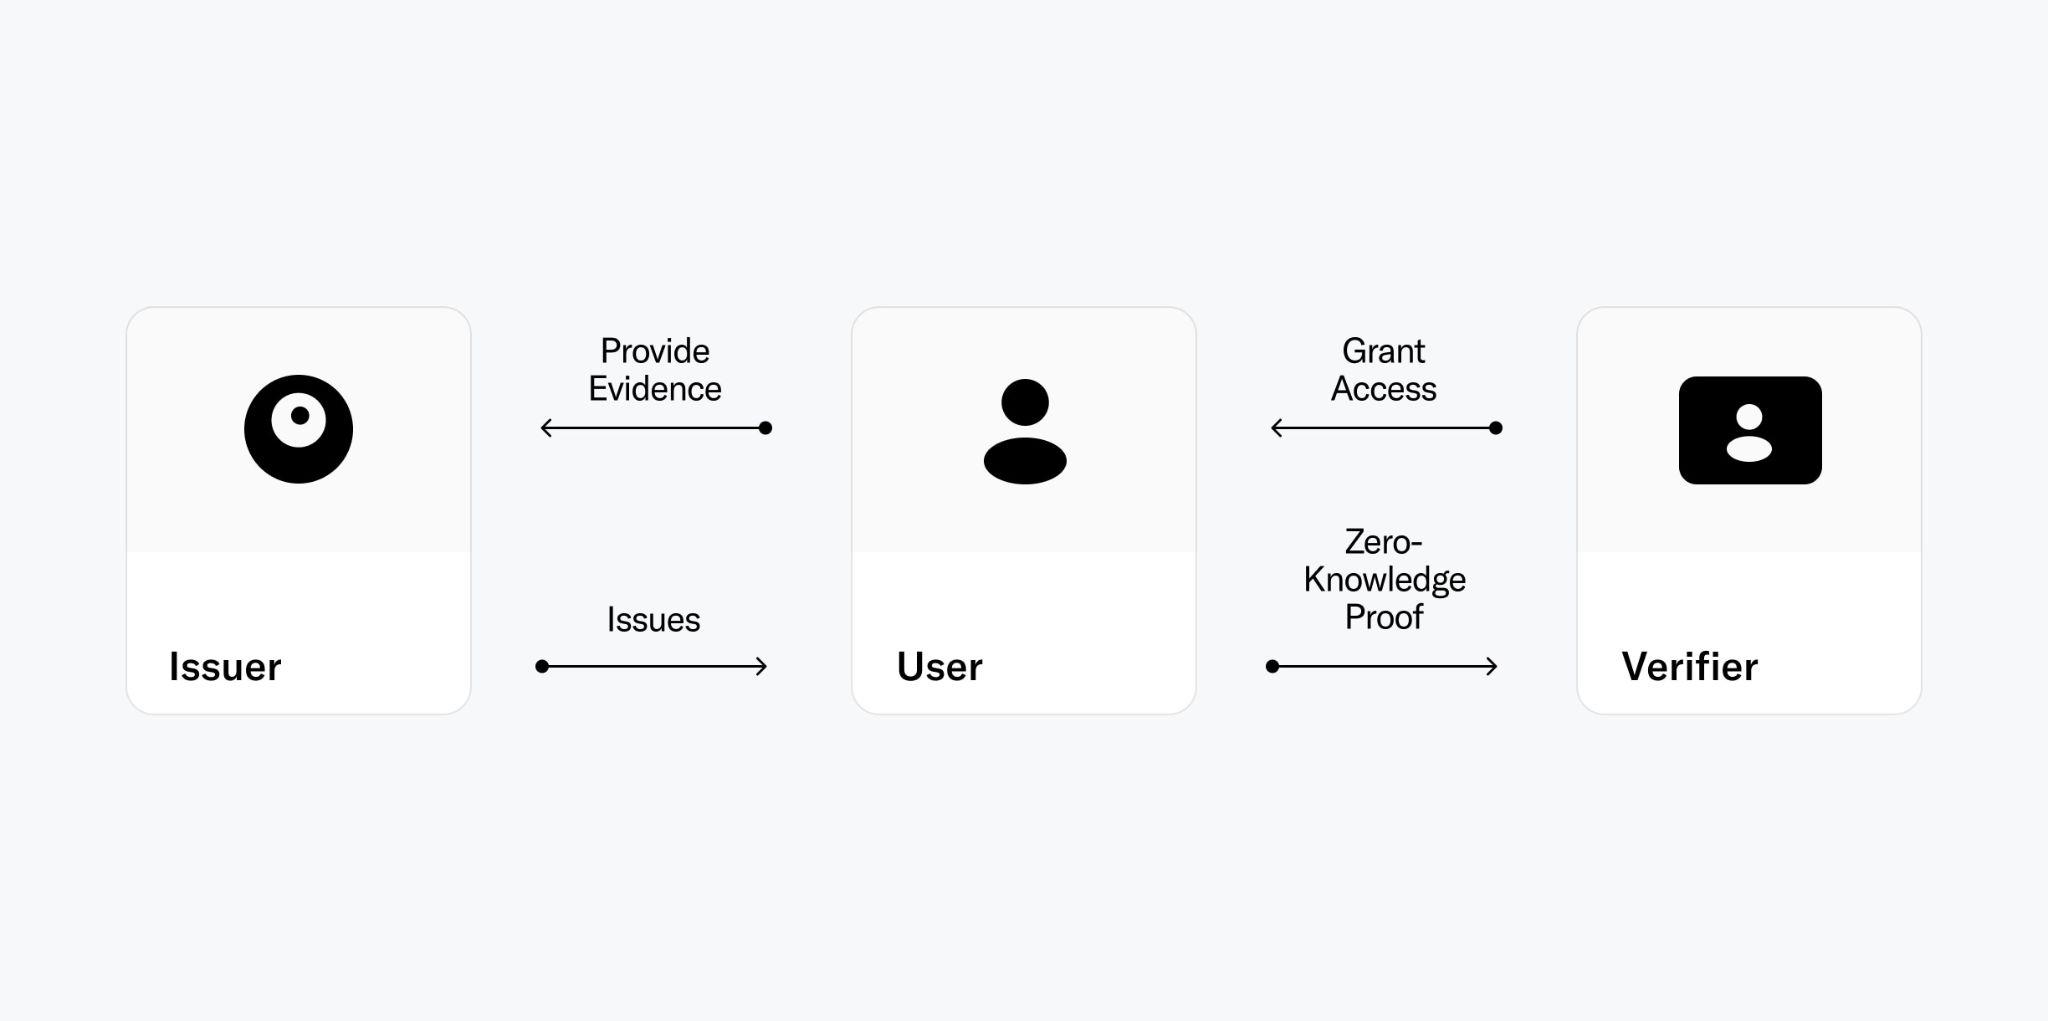 Figure 1: Highly simplified diagram describing the interaction of the different actors of a proof of personhood ecosystem that are required for a user to authenticate as human.